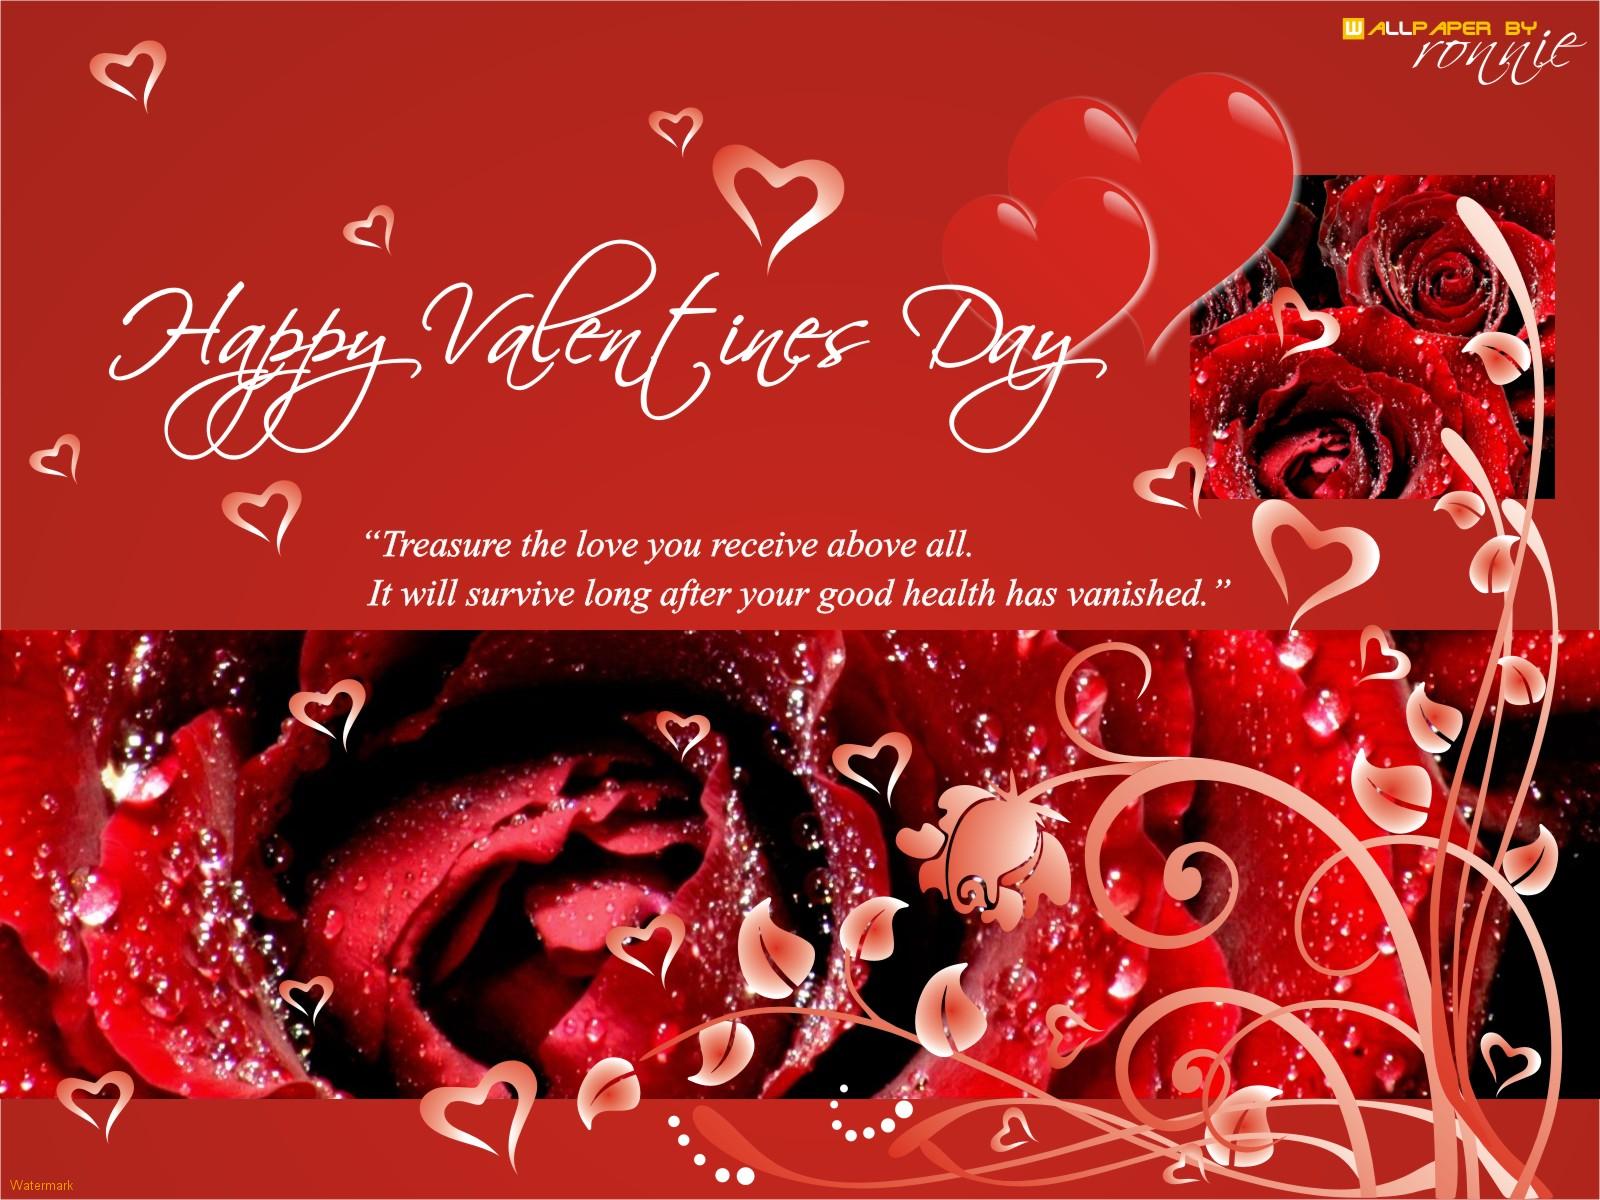 Skd: Valentine Day SMS and Valentine Day Messages